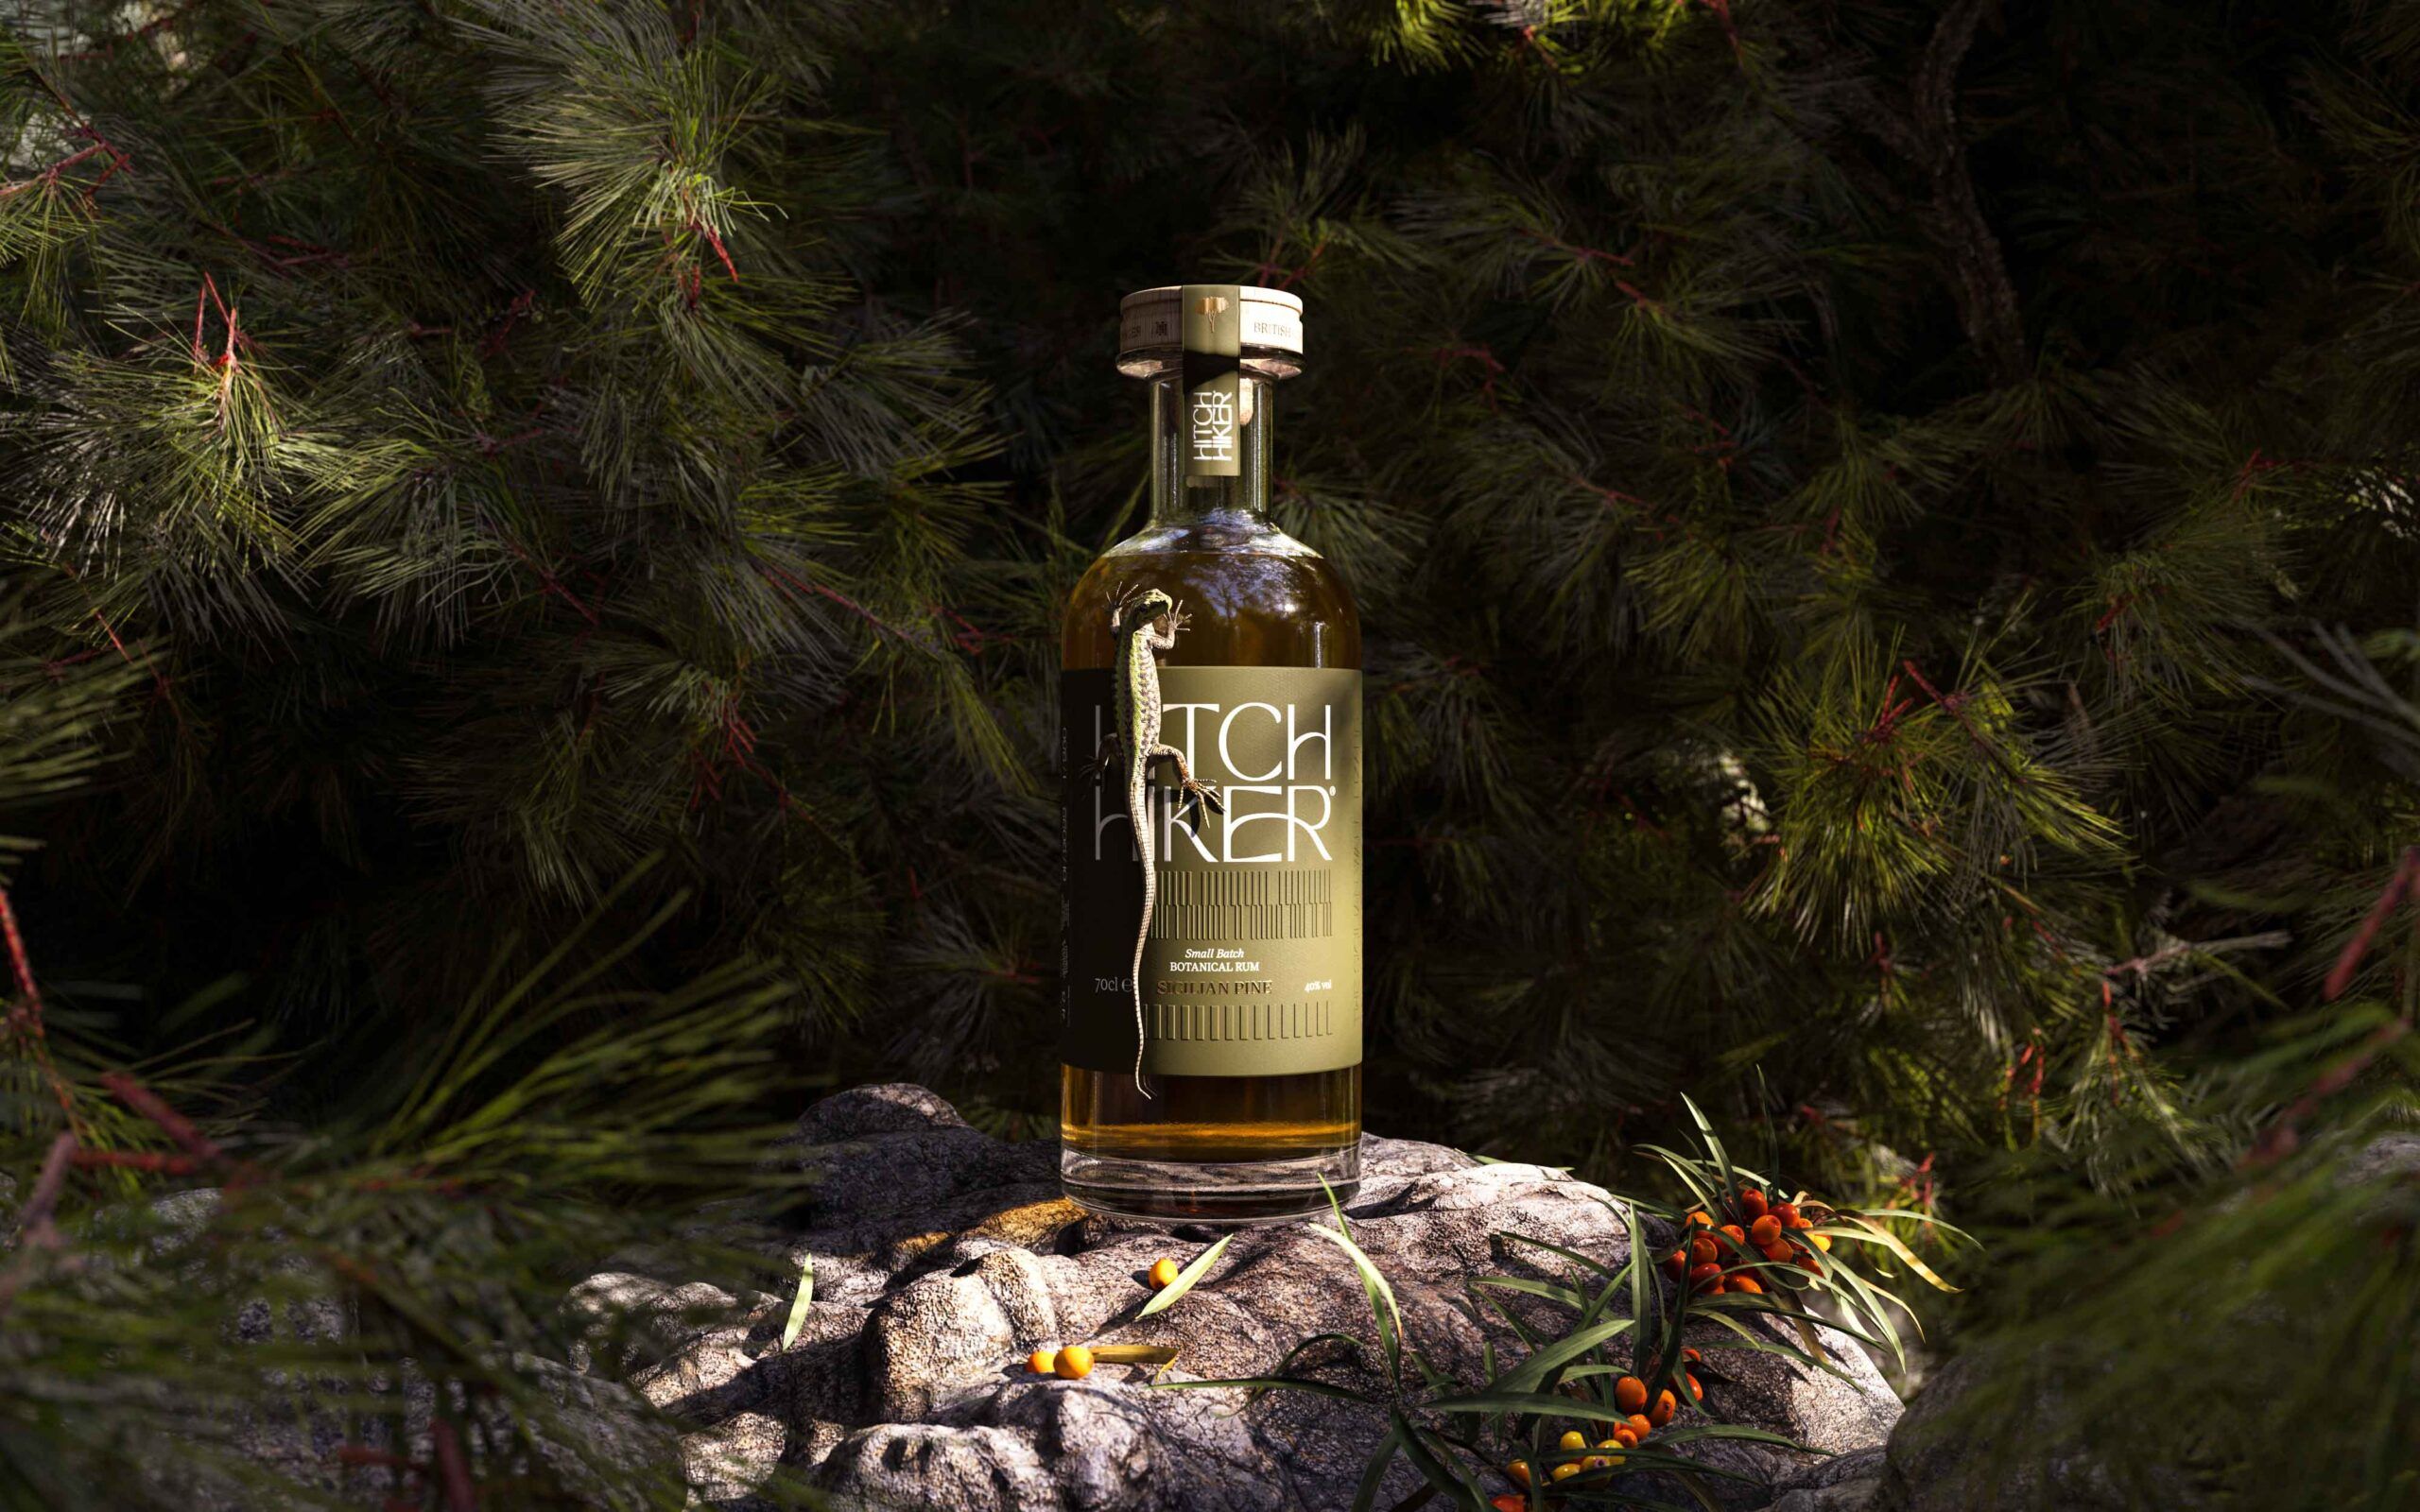 How Hitchhiker rum hopes to appeal to craft rum and gin fans